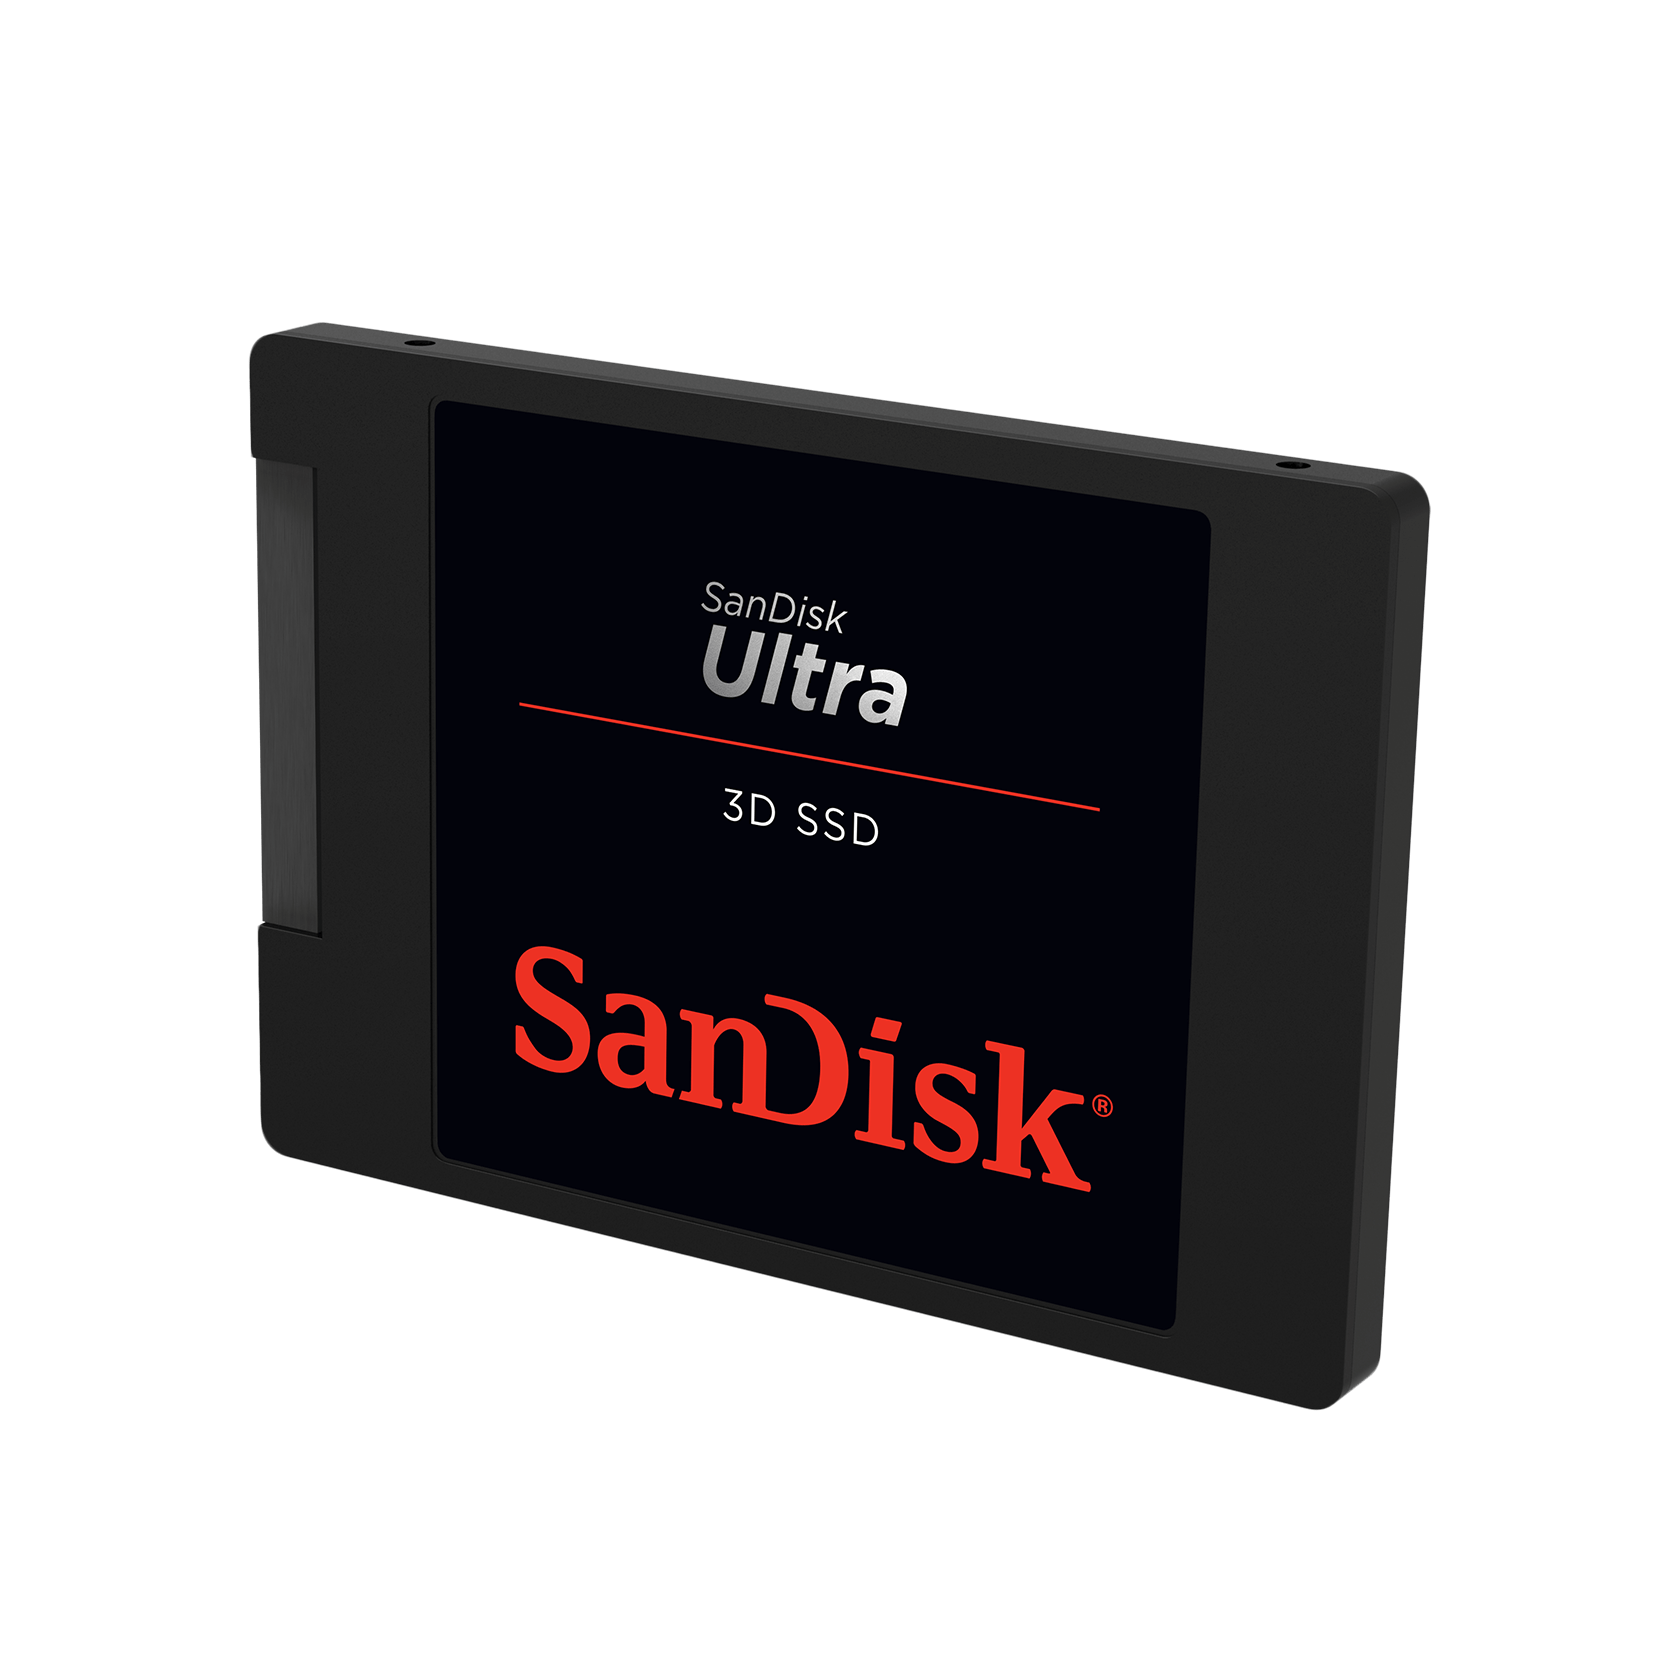 SanDisk 500GB Ultra 3D NAND SSD, Internal Solid State Drive - SDSSDH3-500G-G25 - image 1 of 5